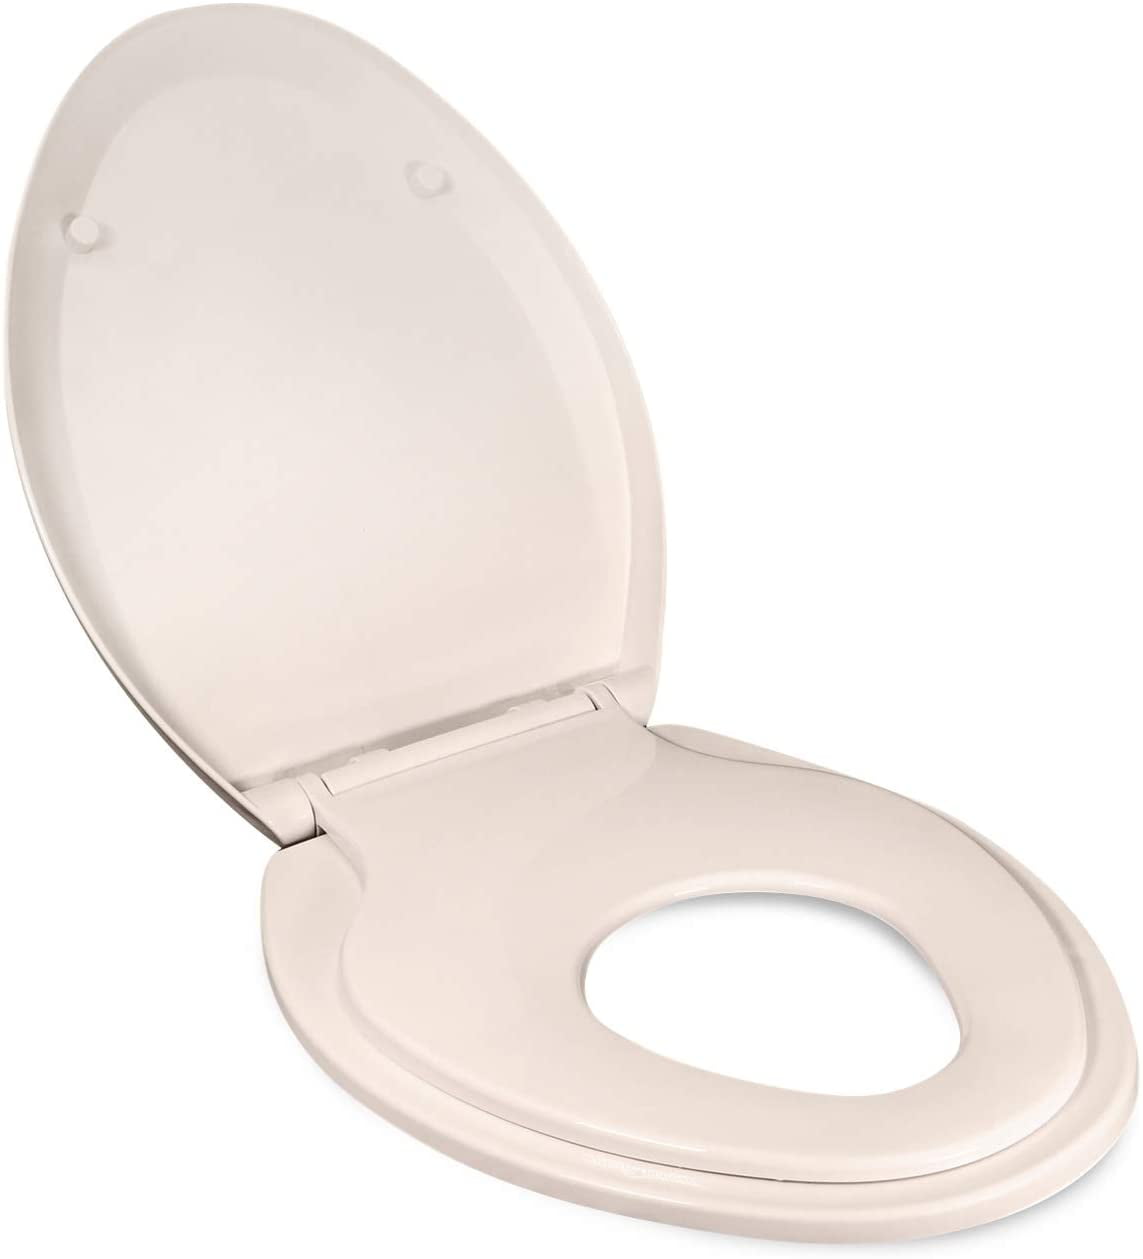 Toilet Seat/Built-In Potty Training Slow-Close Removable Elongated Biscuit/Linen 